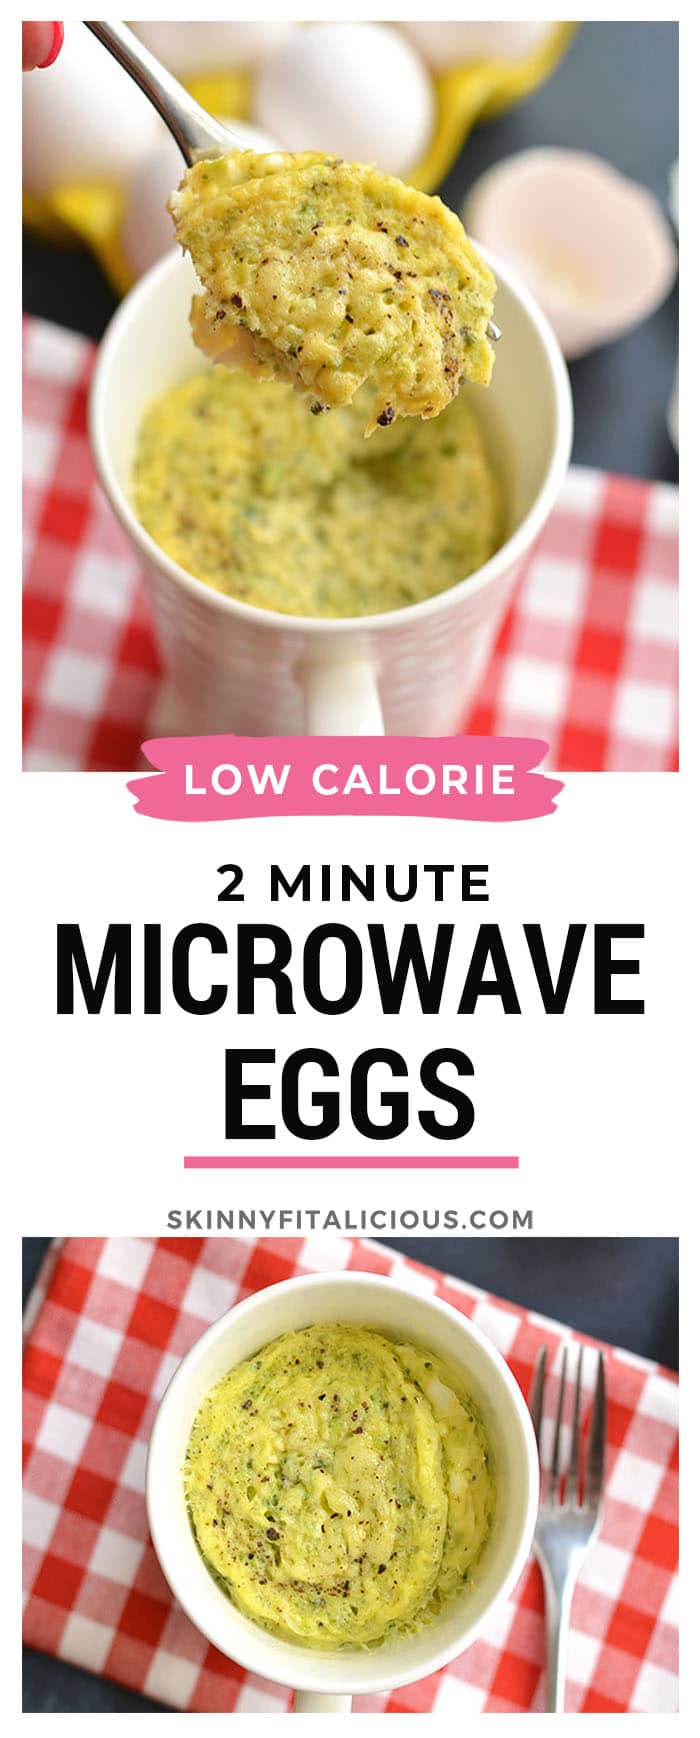 These Microwave Eggs are made in a mug in less than 2 minutes. Customize them to be scrambled or toss in veggies to make an omelet. No matter how you eat them, a healthy breakfast never got easier! Gluten Free + Low Calorie + Paleo